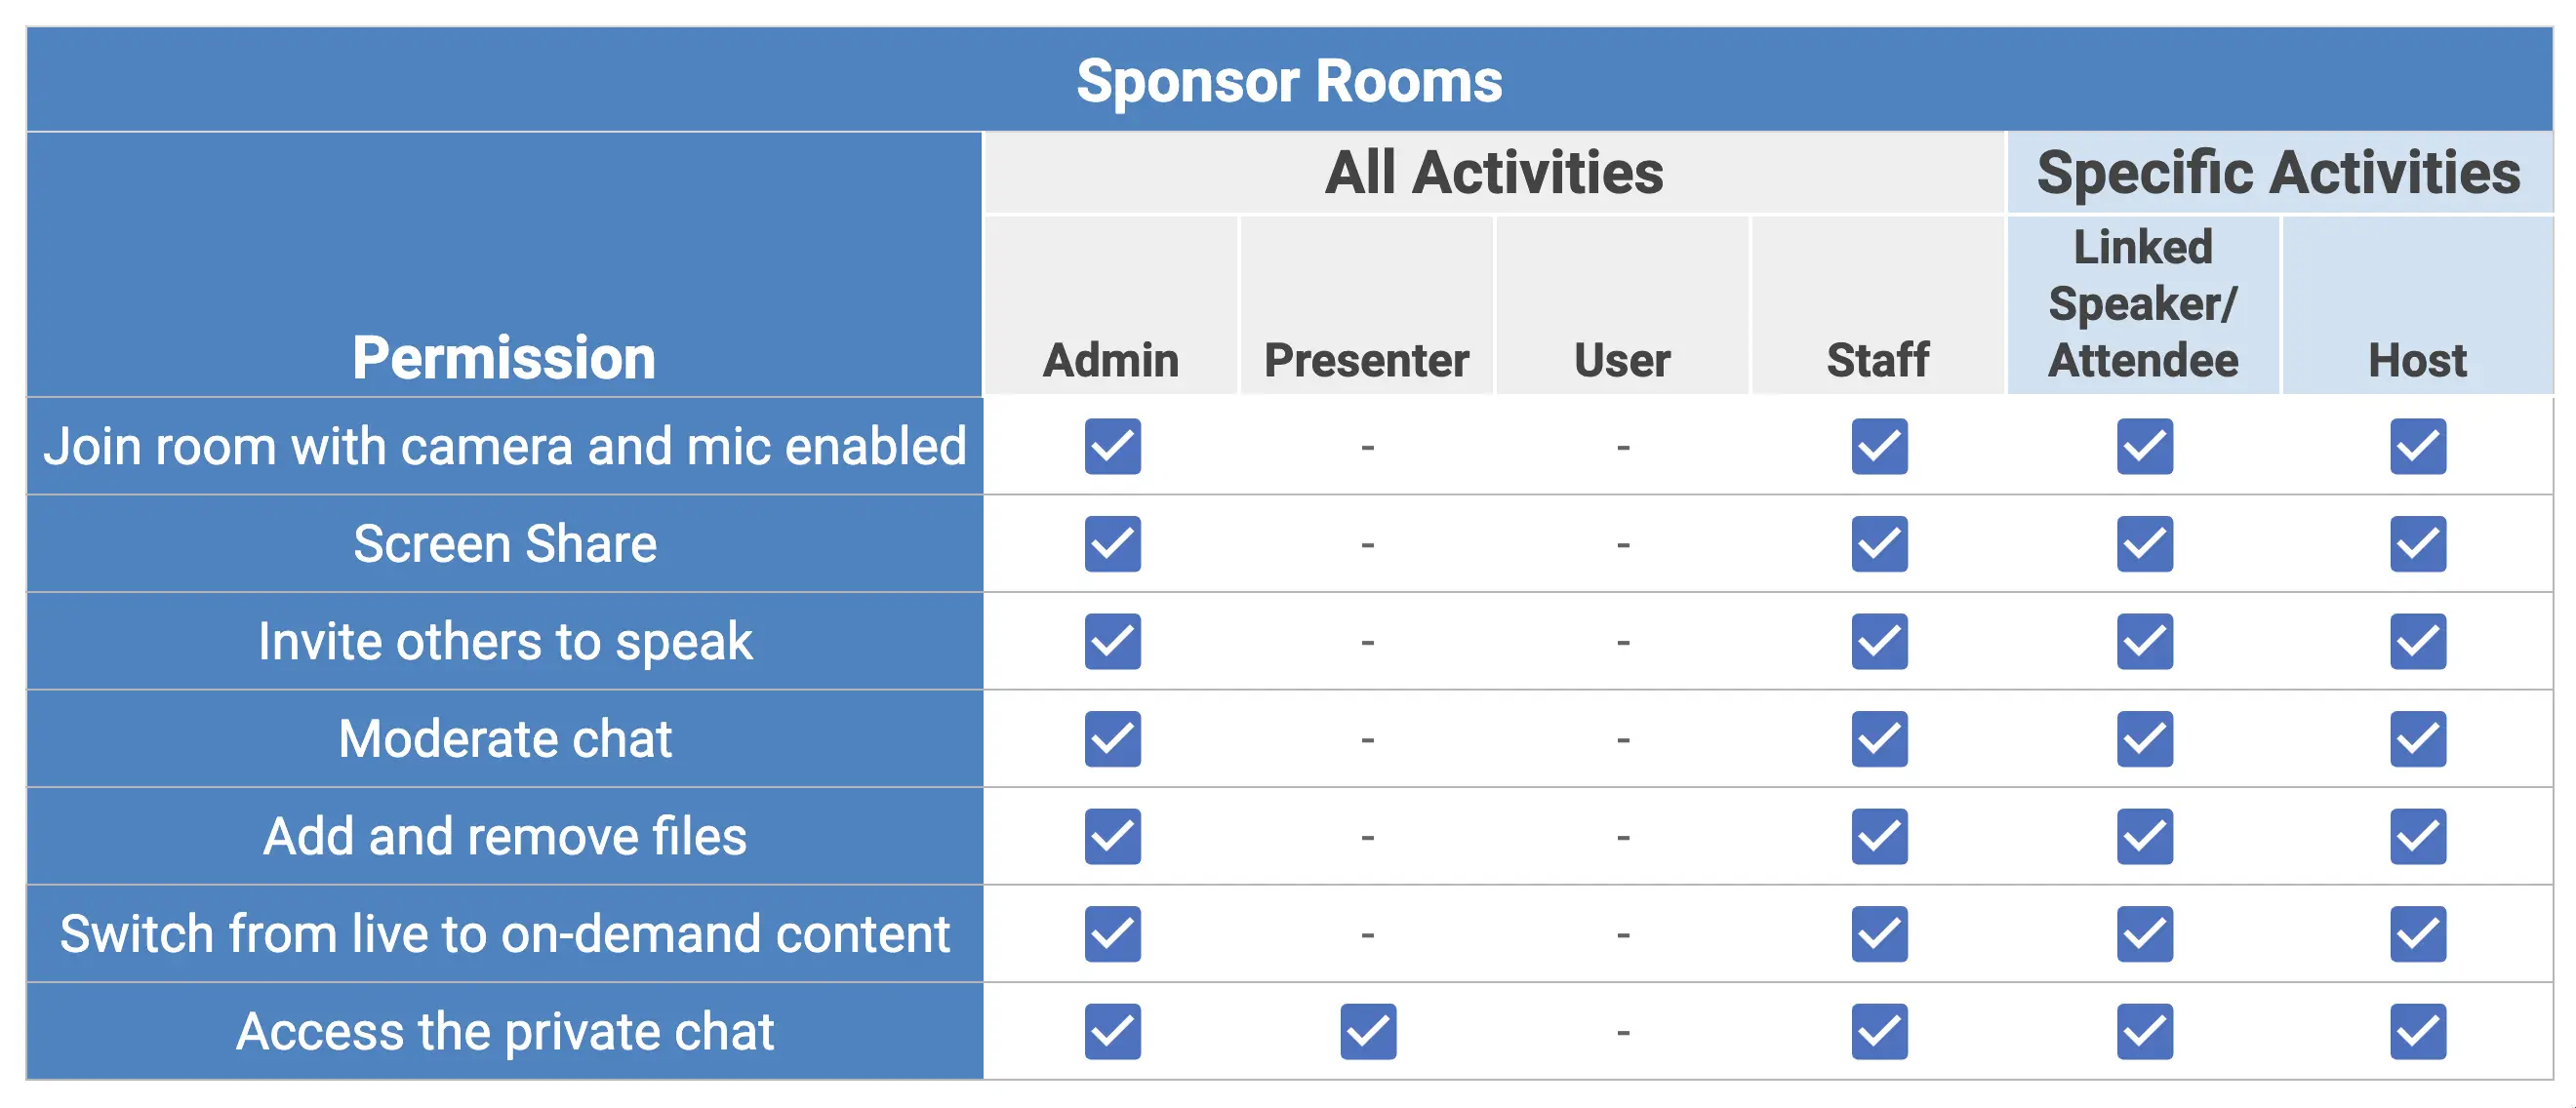 table shows the abilities in each permission level as it applies to Sponsor Rooms within your event.